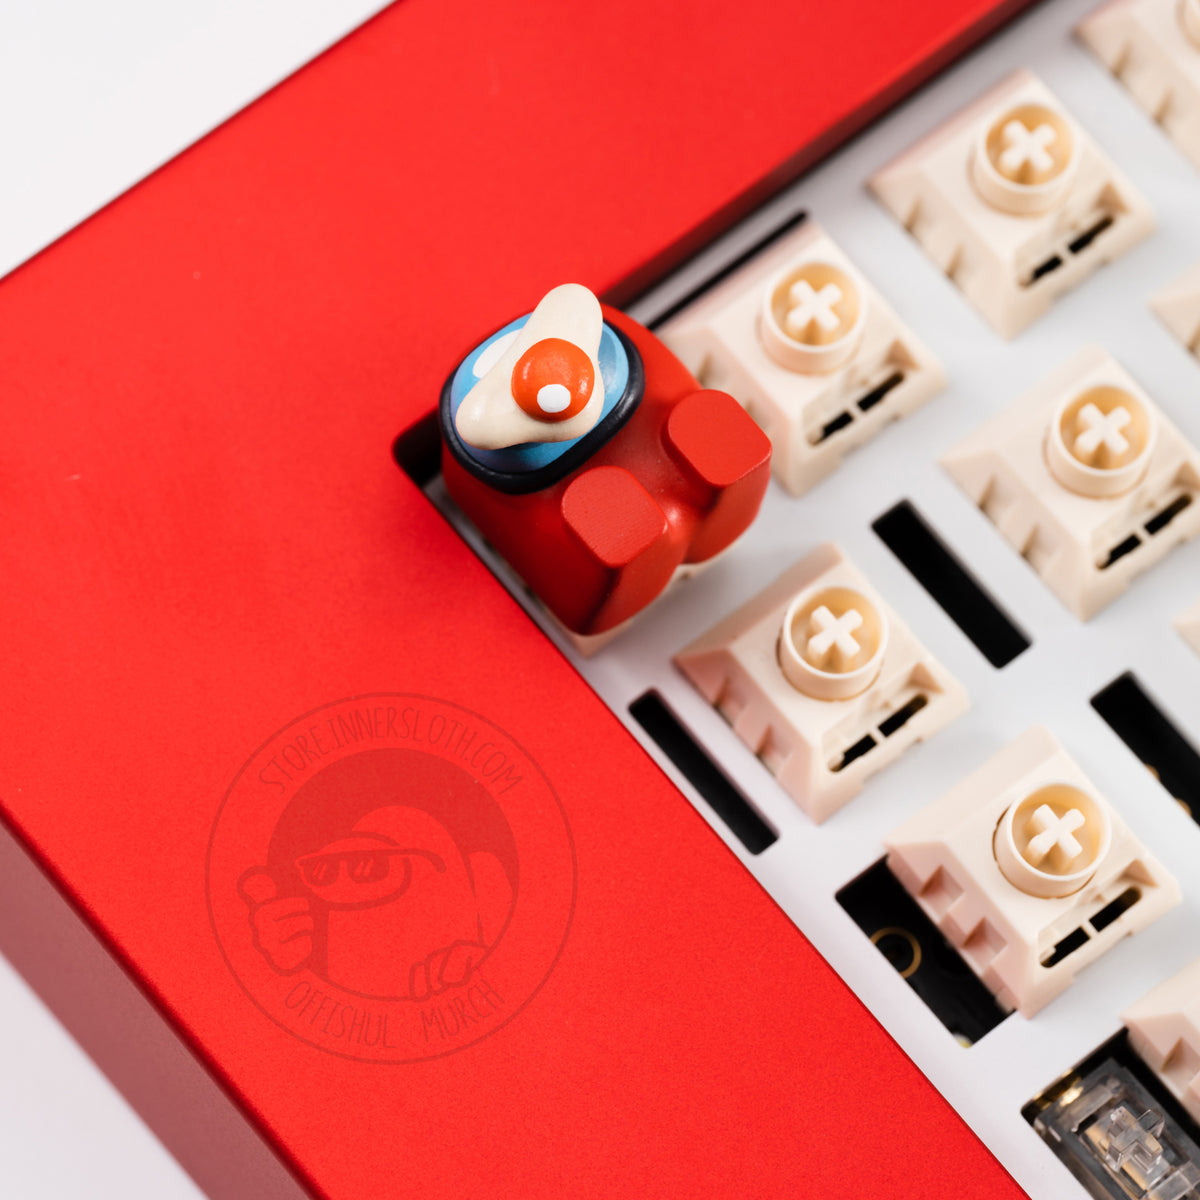 A lifestyle photo of the red crewmate keycap taking the place of the escape key on a red keyboard with missing keys. The crewmate keycap figure lays on its back, and is shown with a fried egg accessory over its visor.